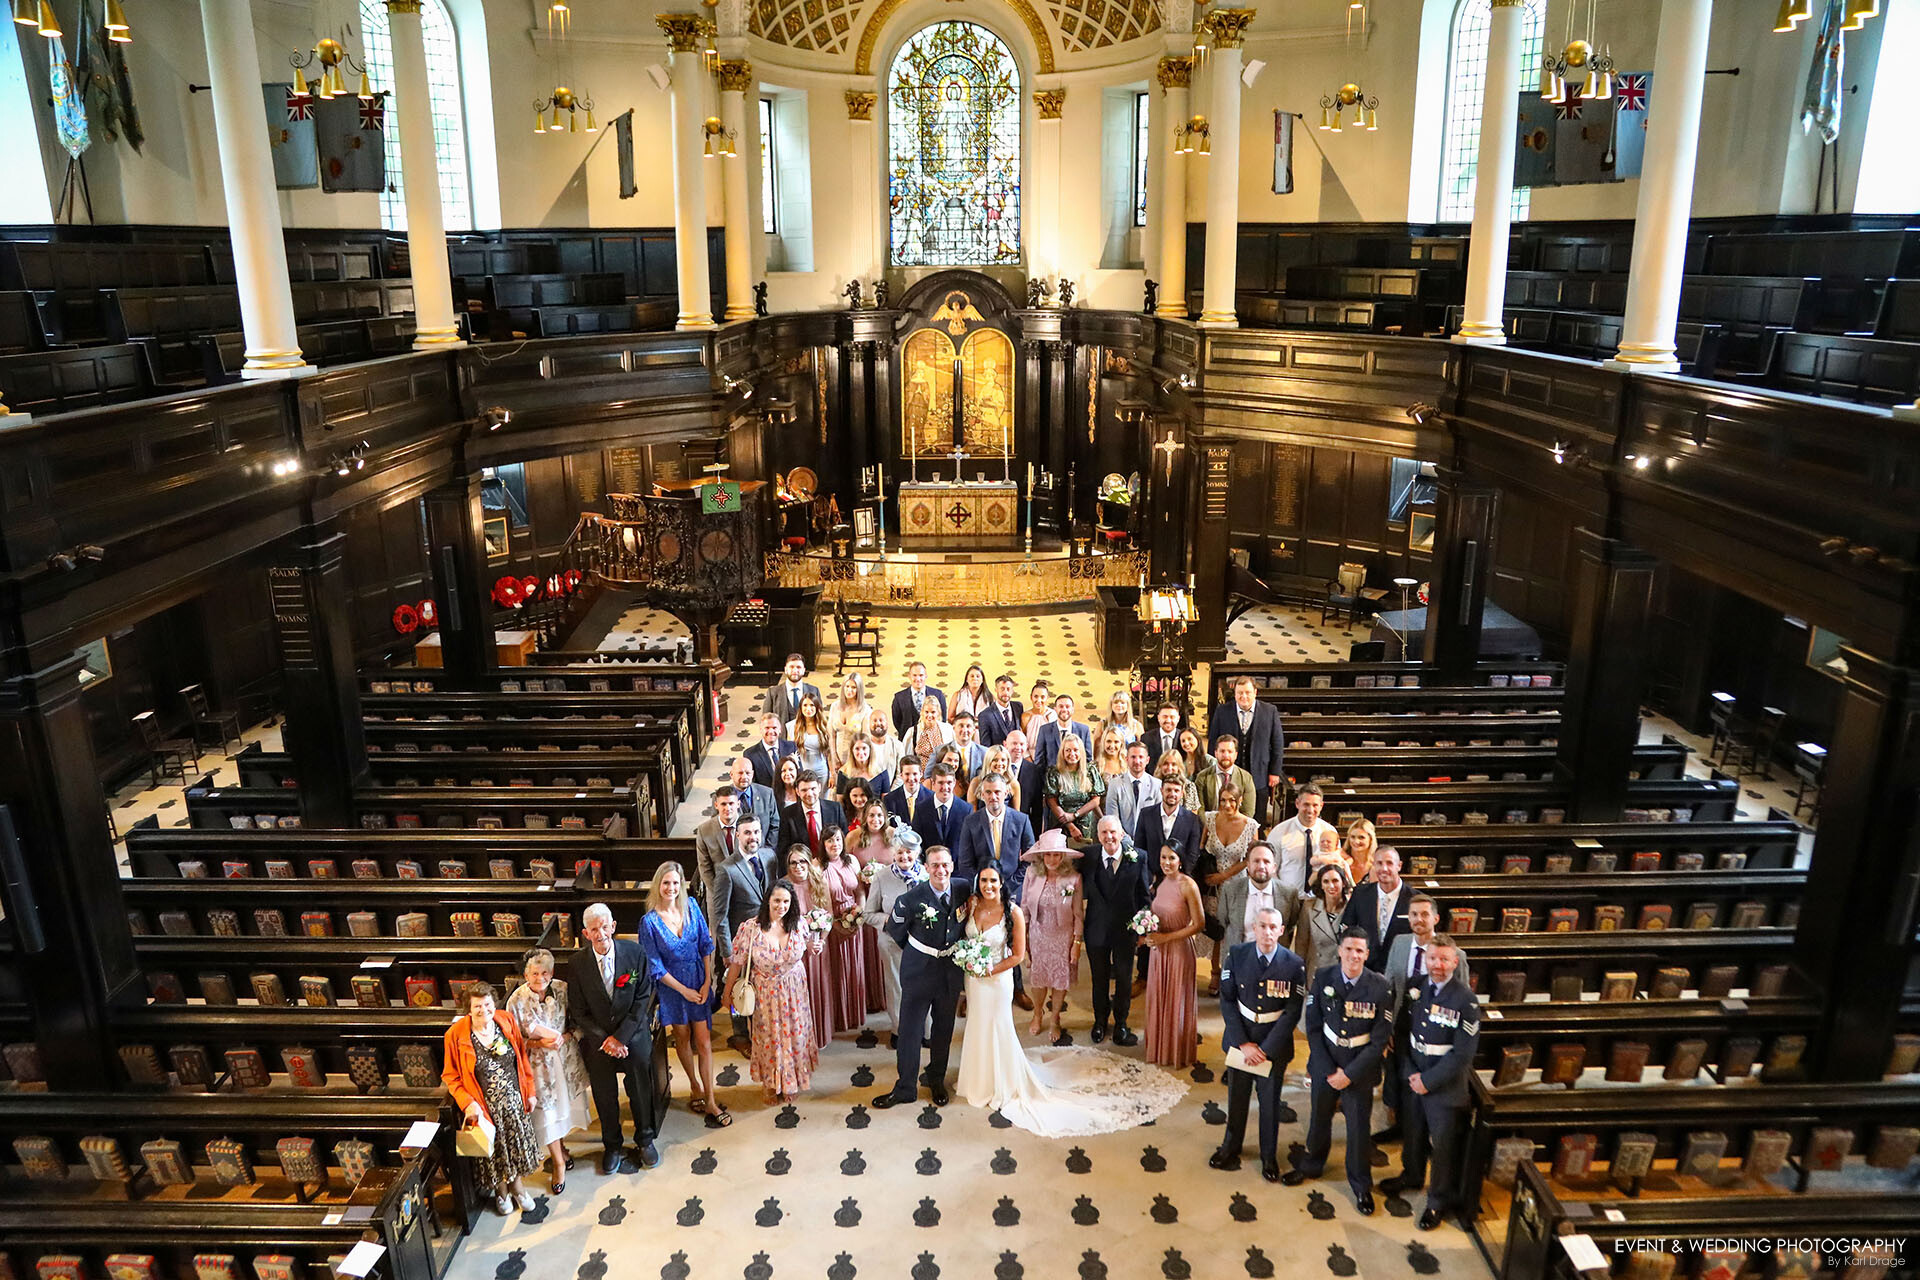 A large wedding day group shot taken from the rear balcony of the St Clements Danes church on a Central London wedding day